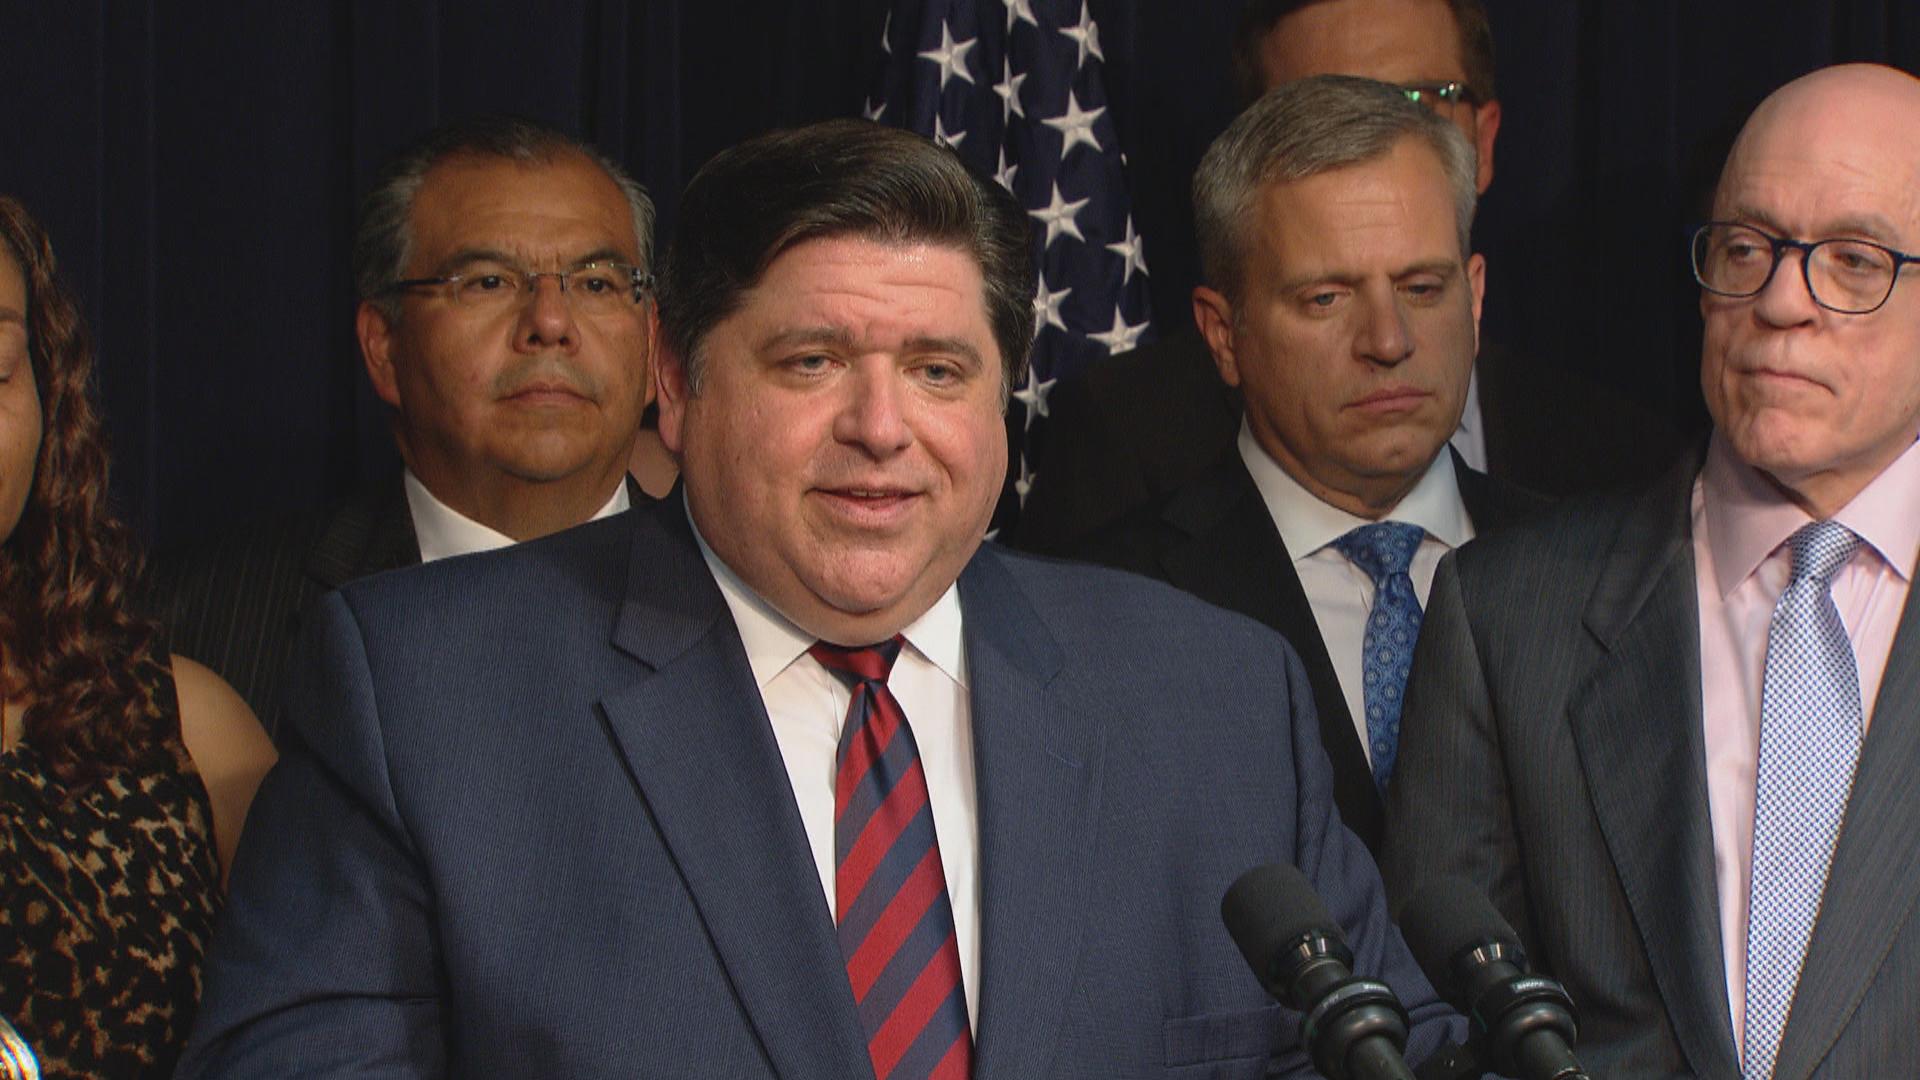 “We’re investing in the things that really matter in this state,” Gov. J.B. Pritzker said at a press conference after signing the $40 billion spending plan Wednesday, June 5, 2019. “Many of these things haven’t been addressed for 20 years.”